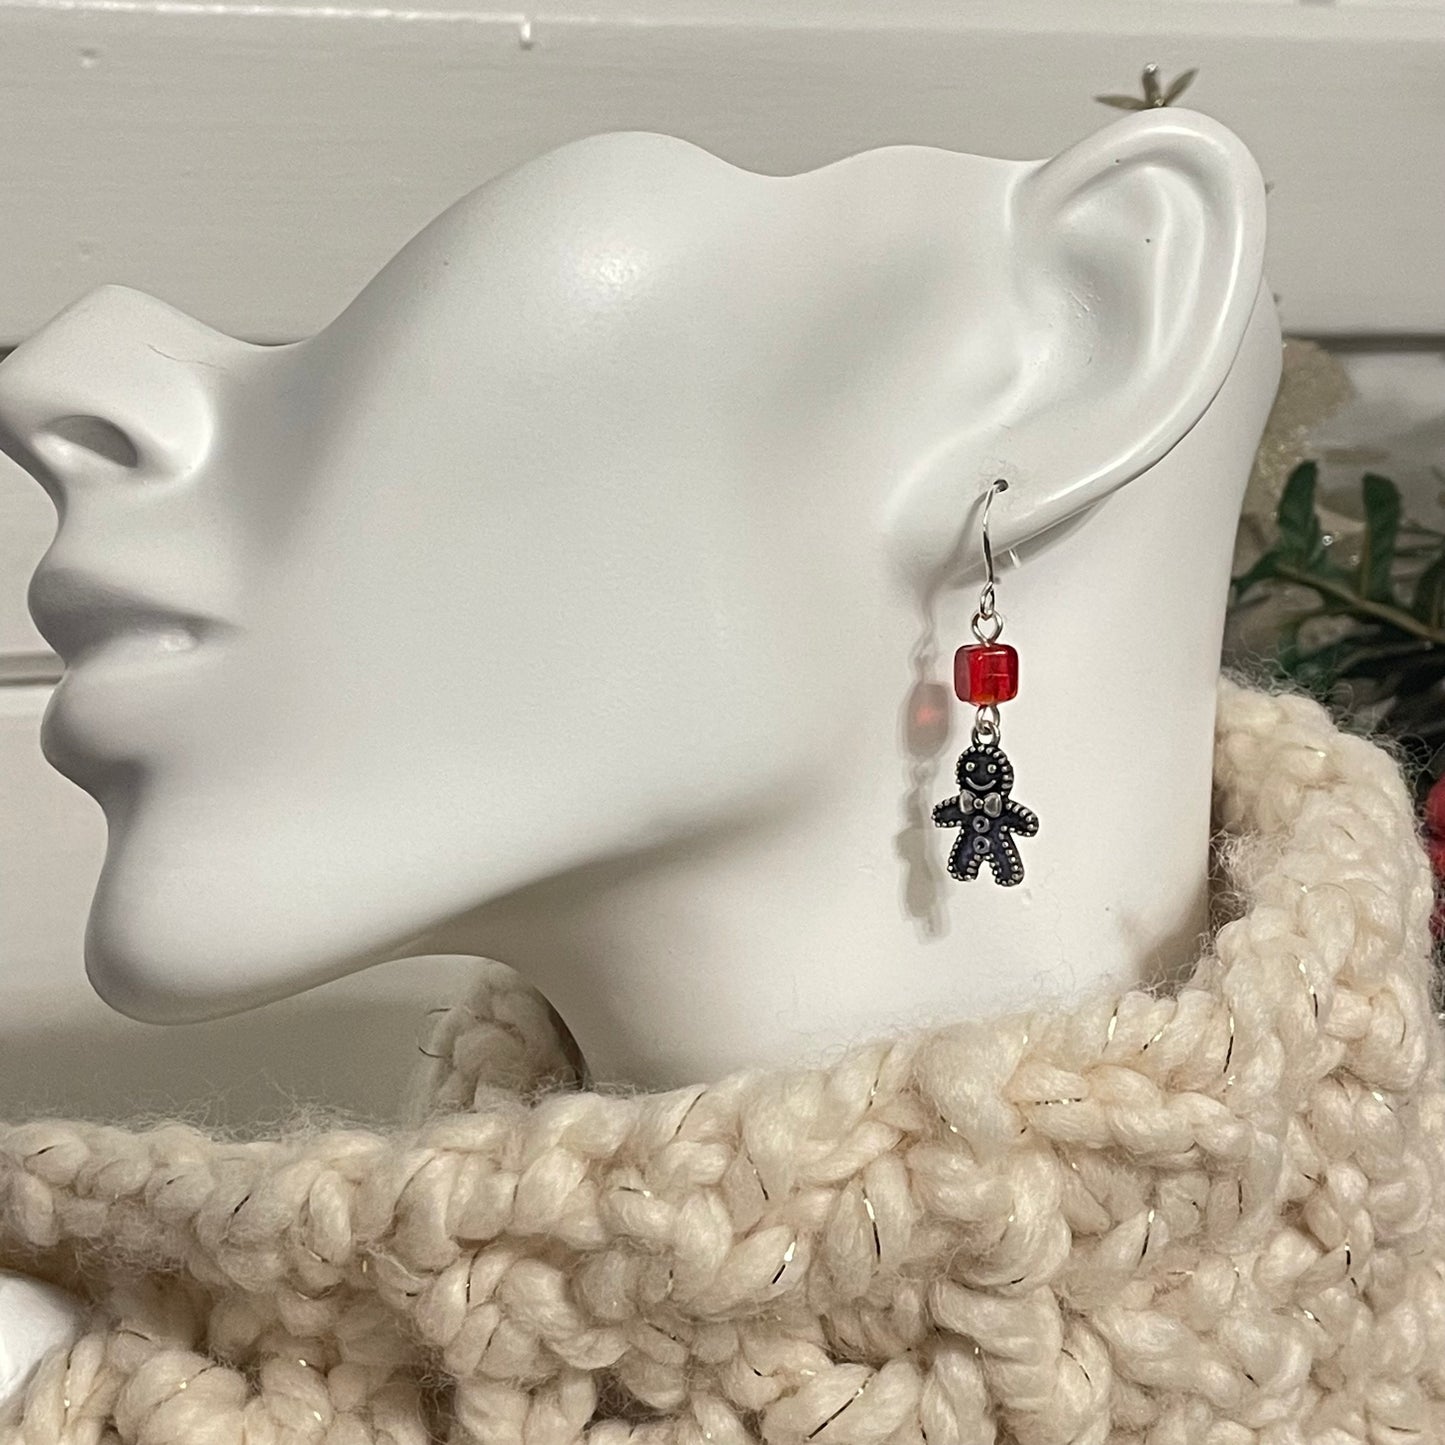 Handmade Gingerbread Charm Earrings Square Bead Accent Holiday Christmas Stocking December Secret Santa Mixed Metal Red Glass